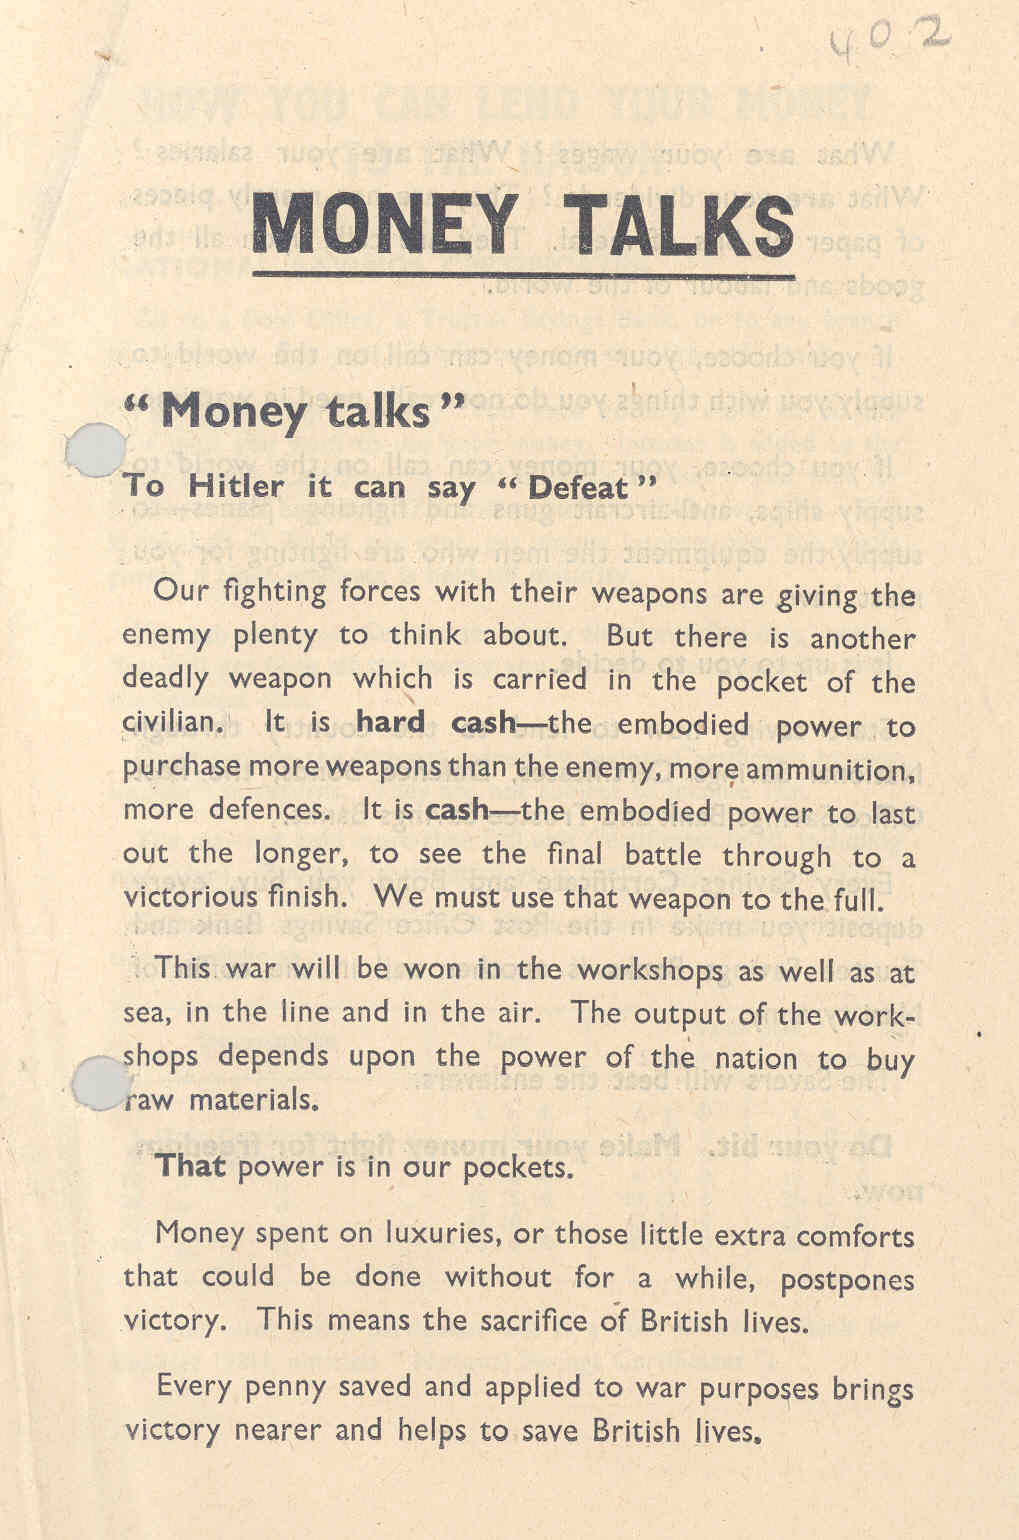 '"Money talks": To Hitler it can say "Defeat"', November 1939